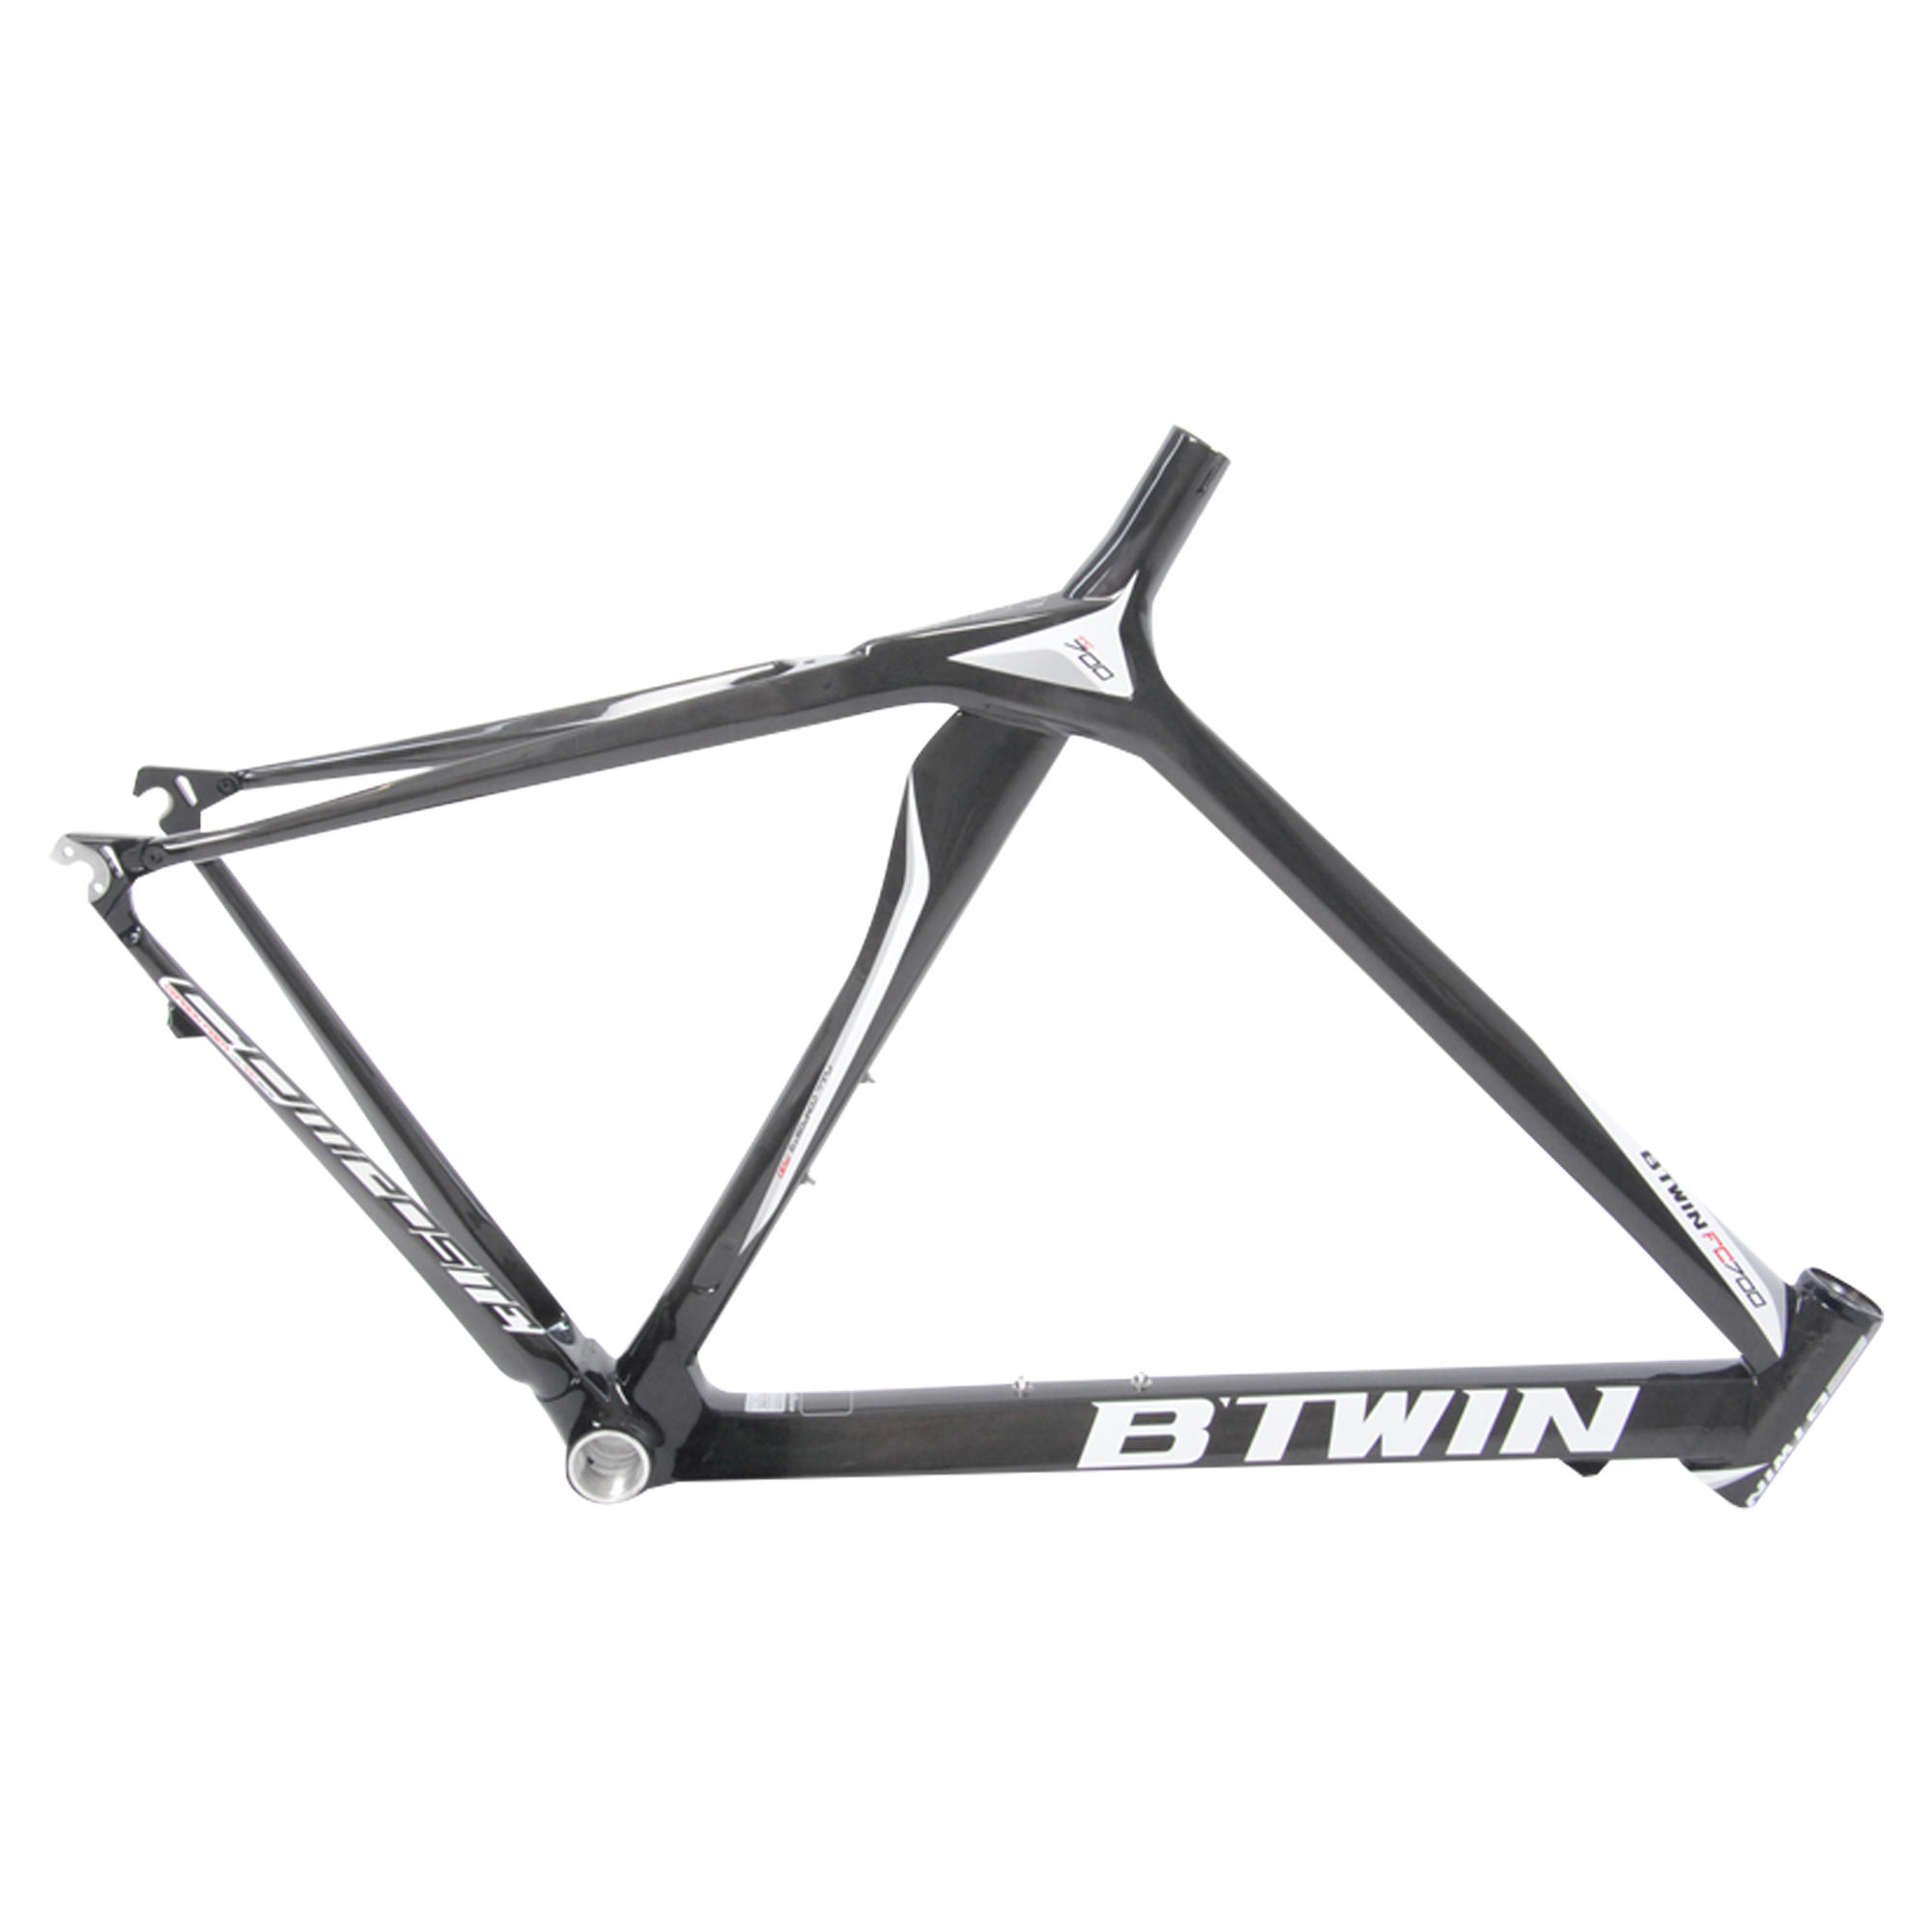 BTWIN Frame FC 5